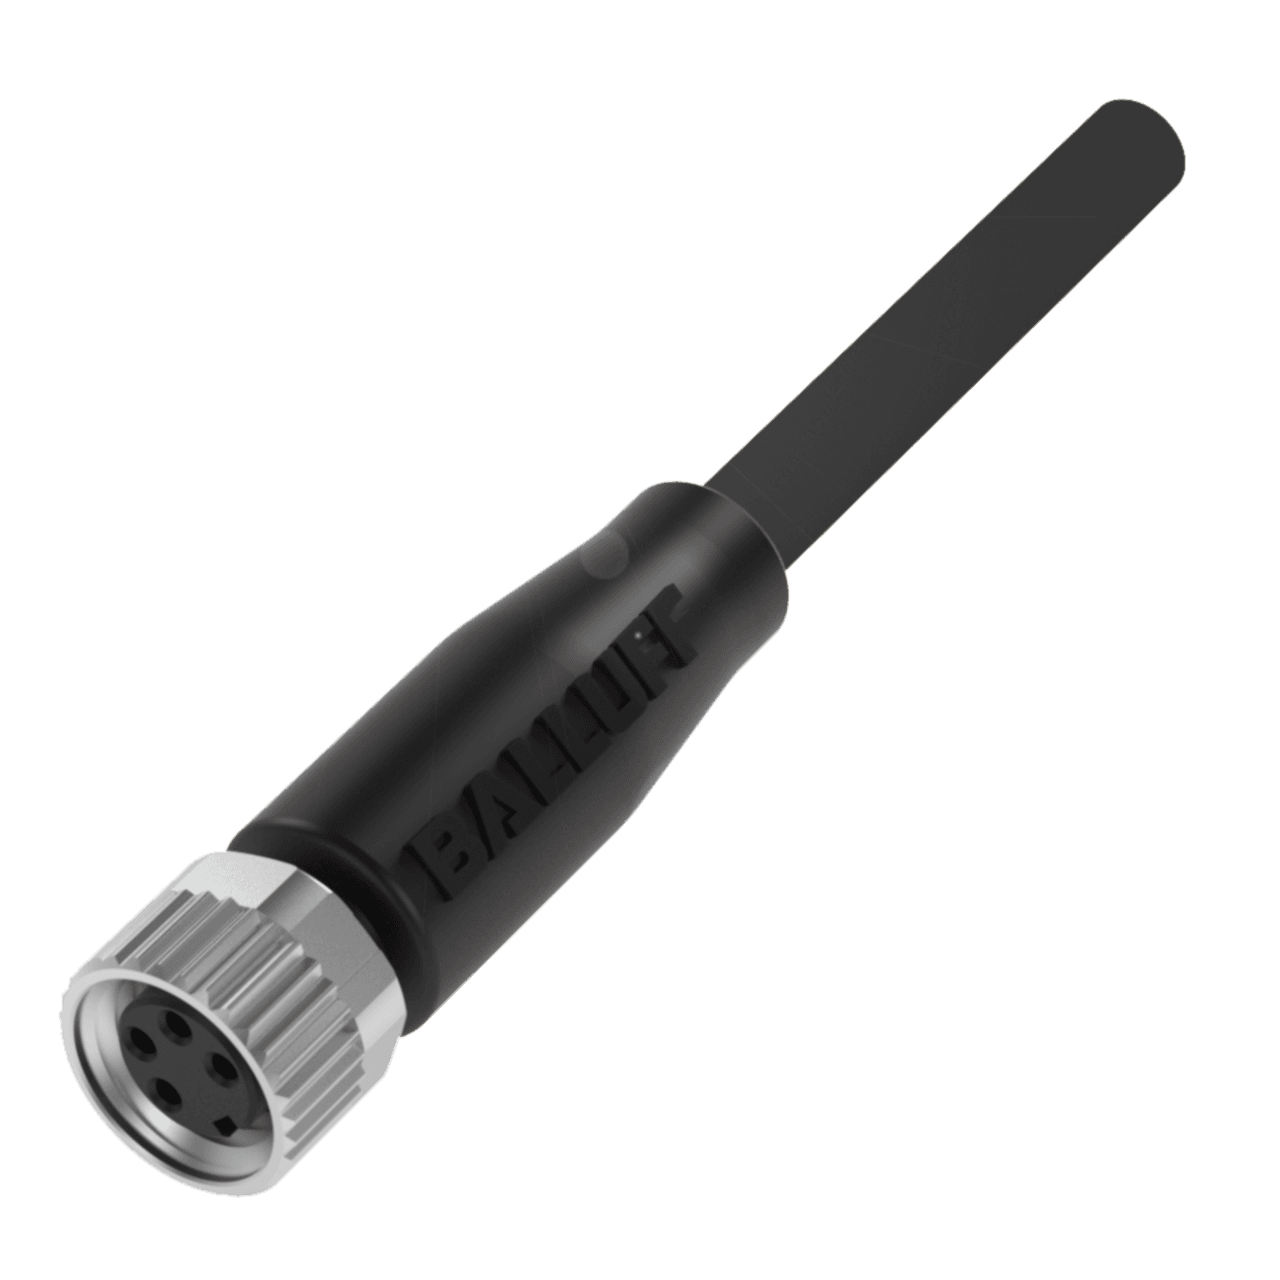 Balluff BCC02N2 Connection: M8x1-Female, Straight, 4-pin, A-coded, Cable: PUR black, 2.00 m, Drag chain compatible, Number of conductors: 4, Conductor cross-section: 0.34 mm², Cable temperature, fixed routing: -50...90 °C, Cable temperature, flexible routing: -25...90 °C